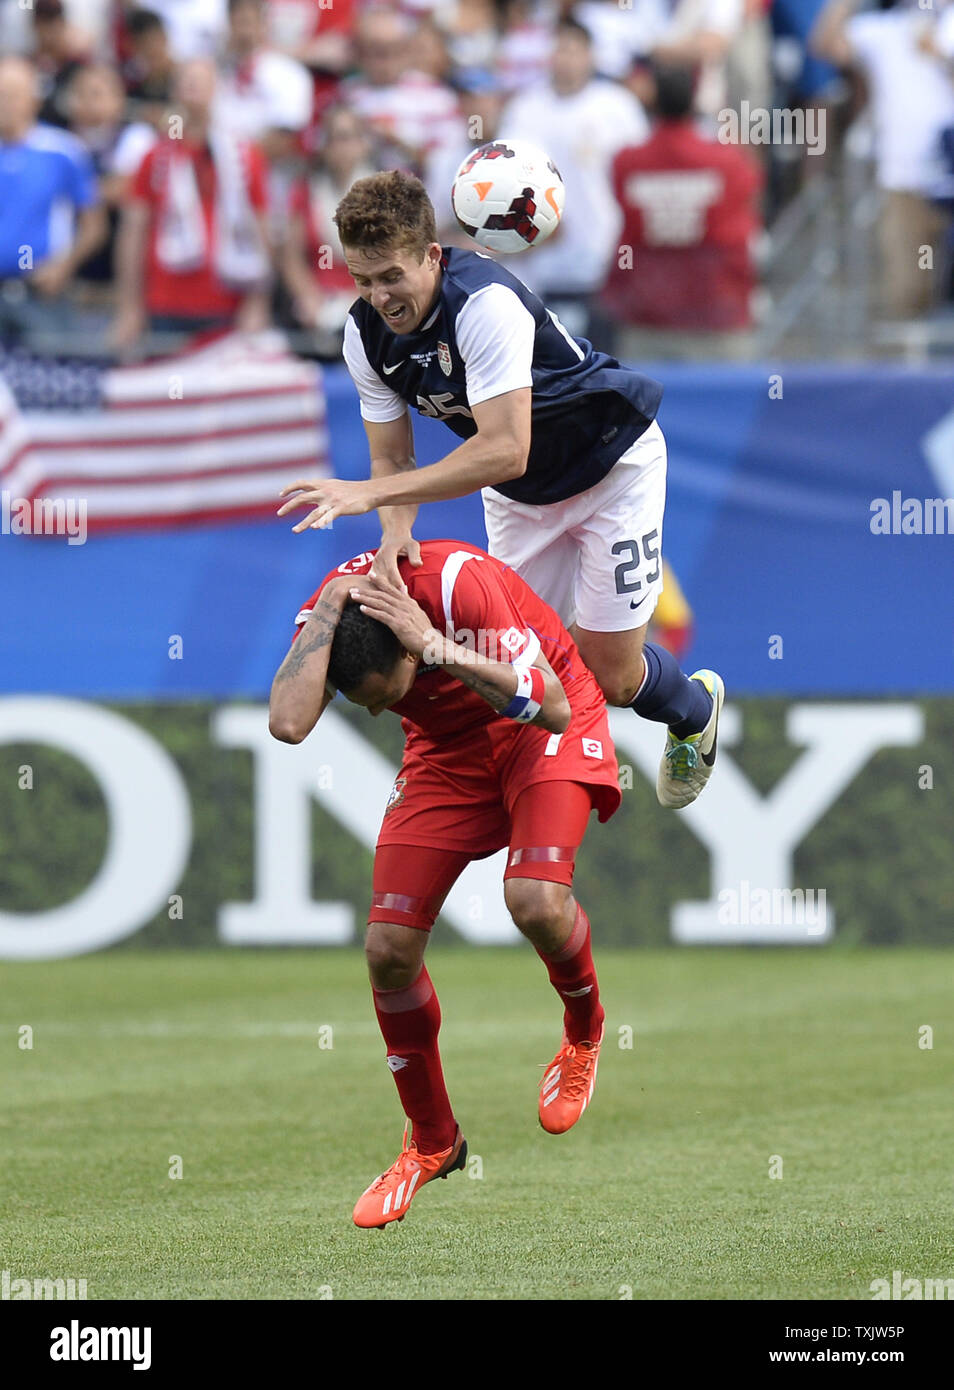 Panama forward Blas Perez (L) and United States defender Matt Besler go for the ball during the second half of the 2013 CONCACAF Gold Cup Final at Soldier Field in Chicago on July 28, 2013. The United States won 1-0.     UPI/Brian Kersey Stock Photo